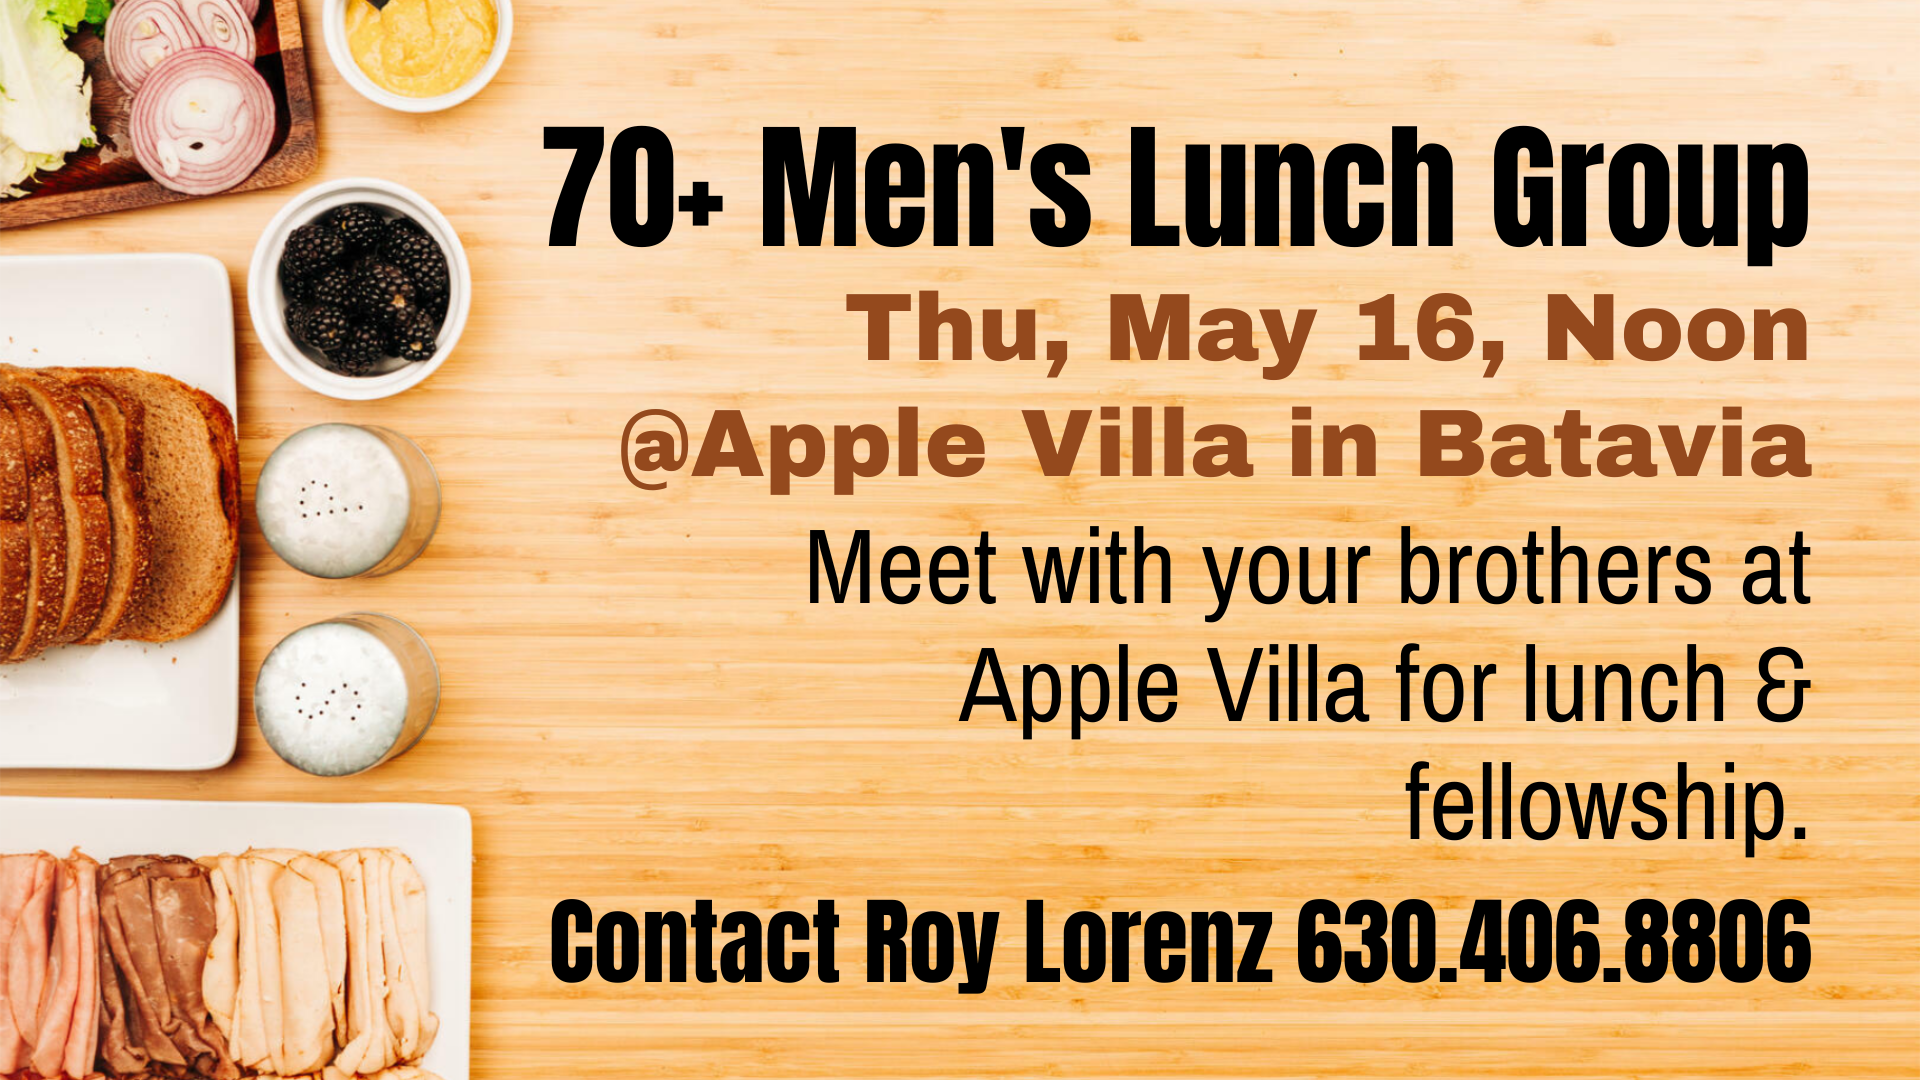 70+ Men's Lunch Group